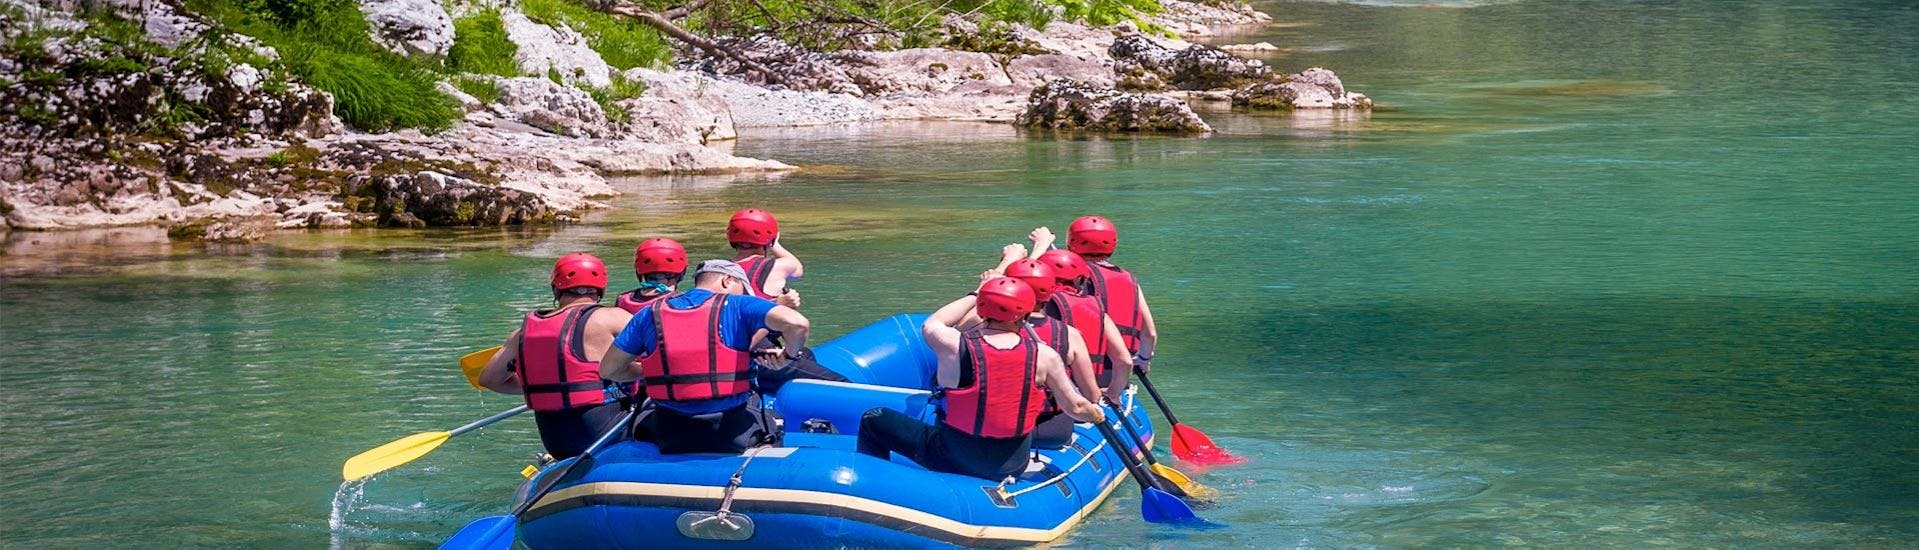 A group of friends is paddling during a Classic Rafting on the Simme River with Valrafting Valais.